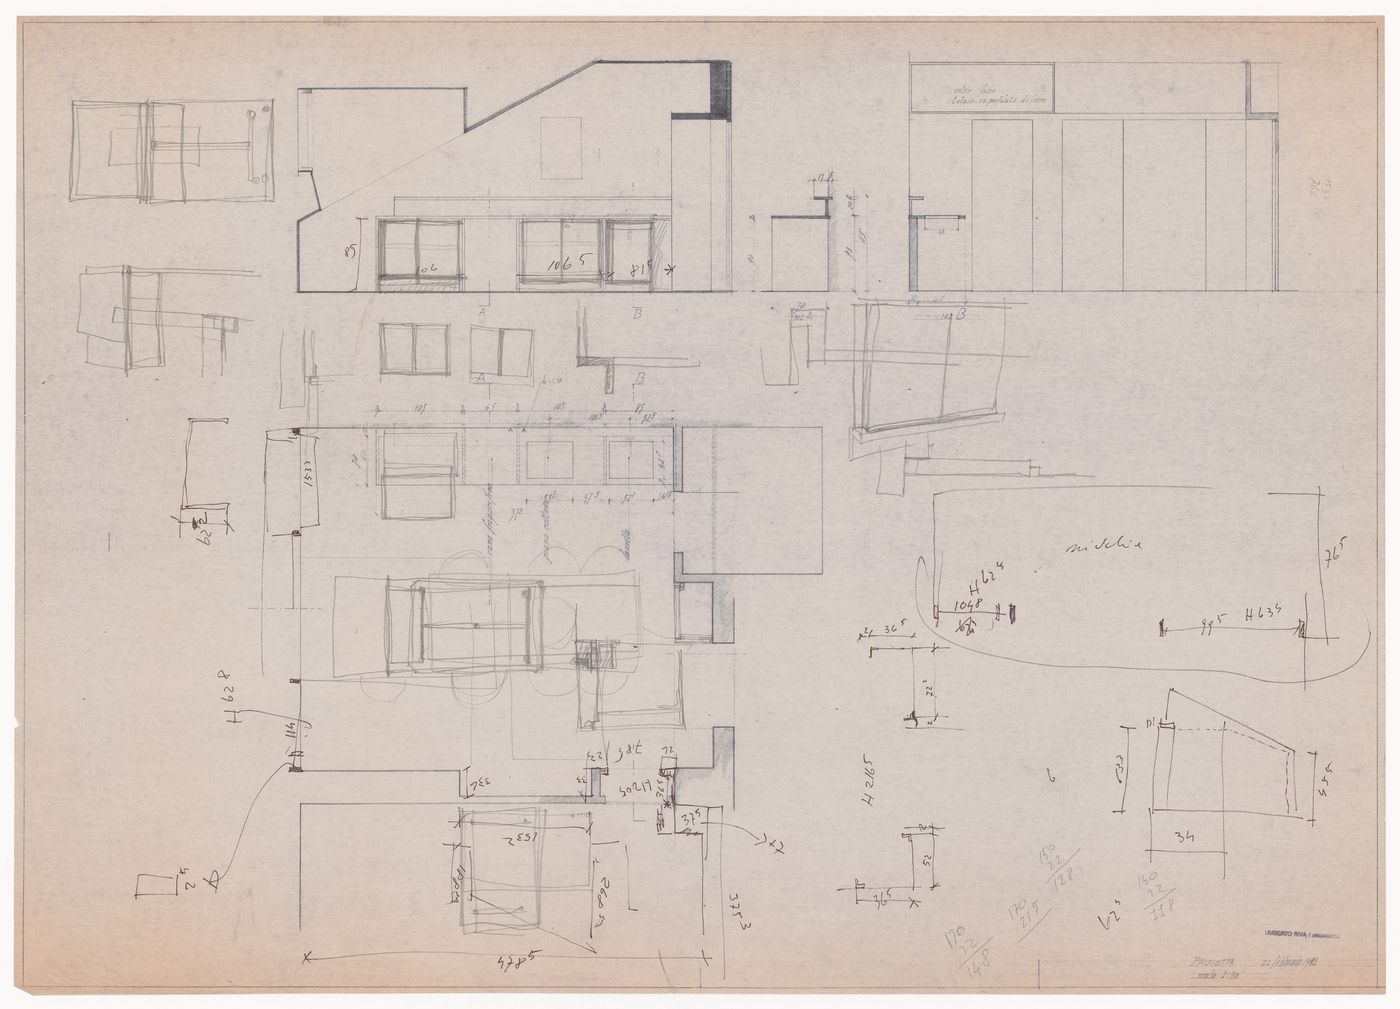 Plans and sections for Casa Palmiotta, Italy